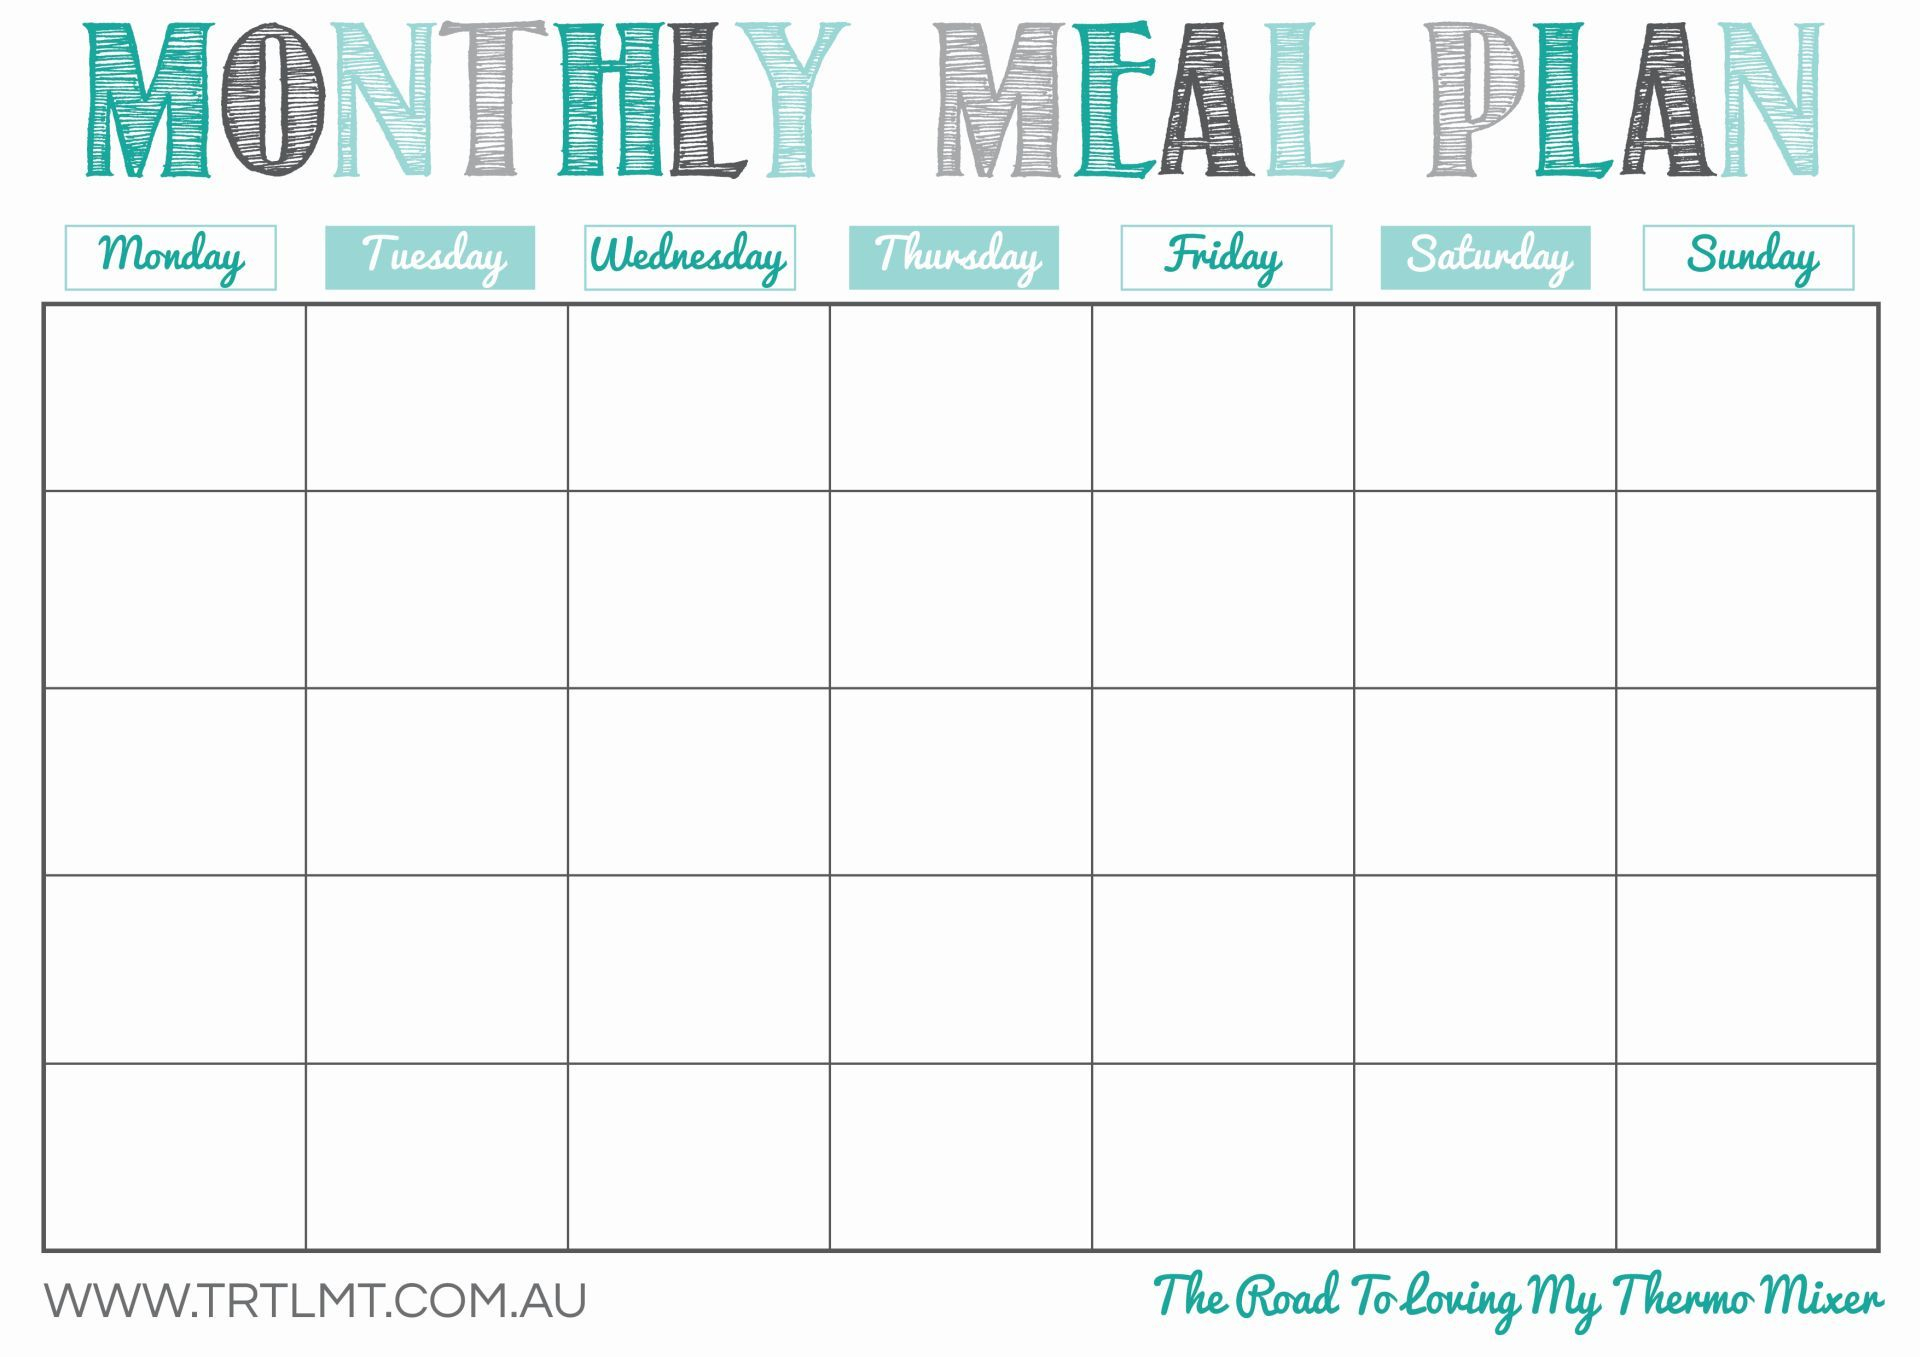 Printable Monthly Meal Planner | Organization In 2019 | Meal Planner - Free Printable Monthly Meal Planner